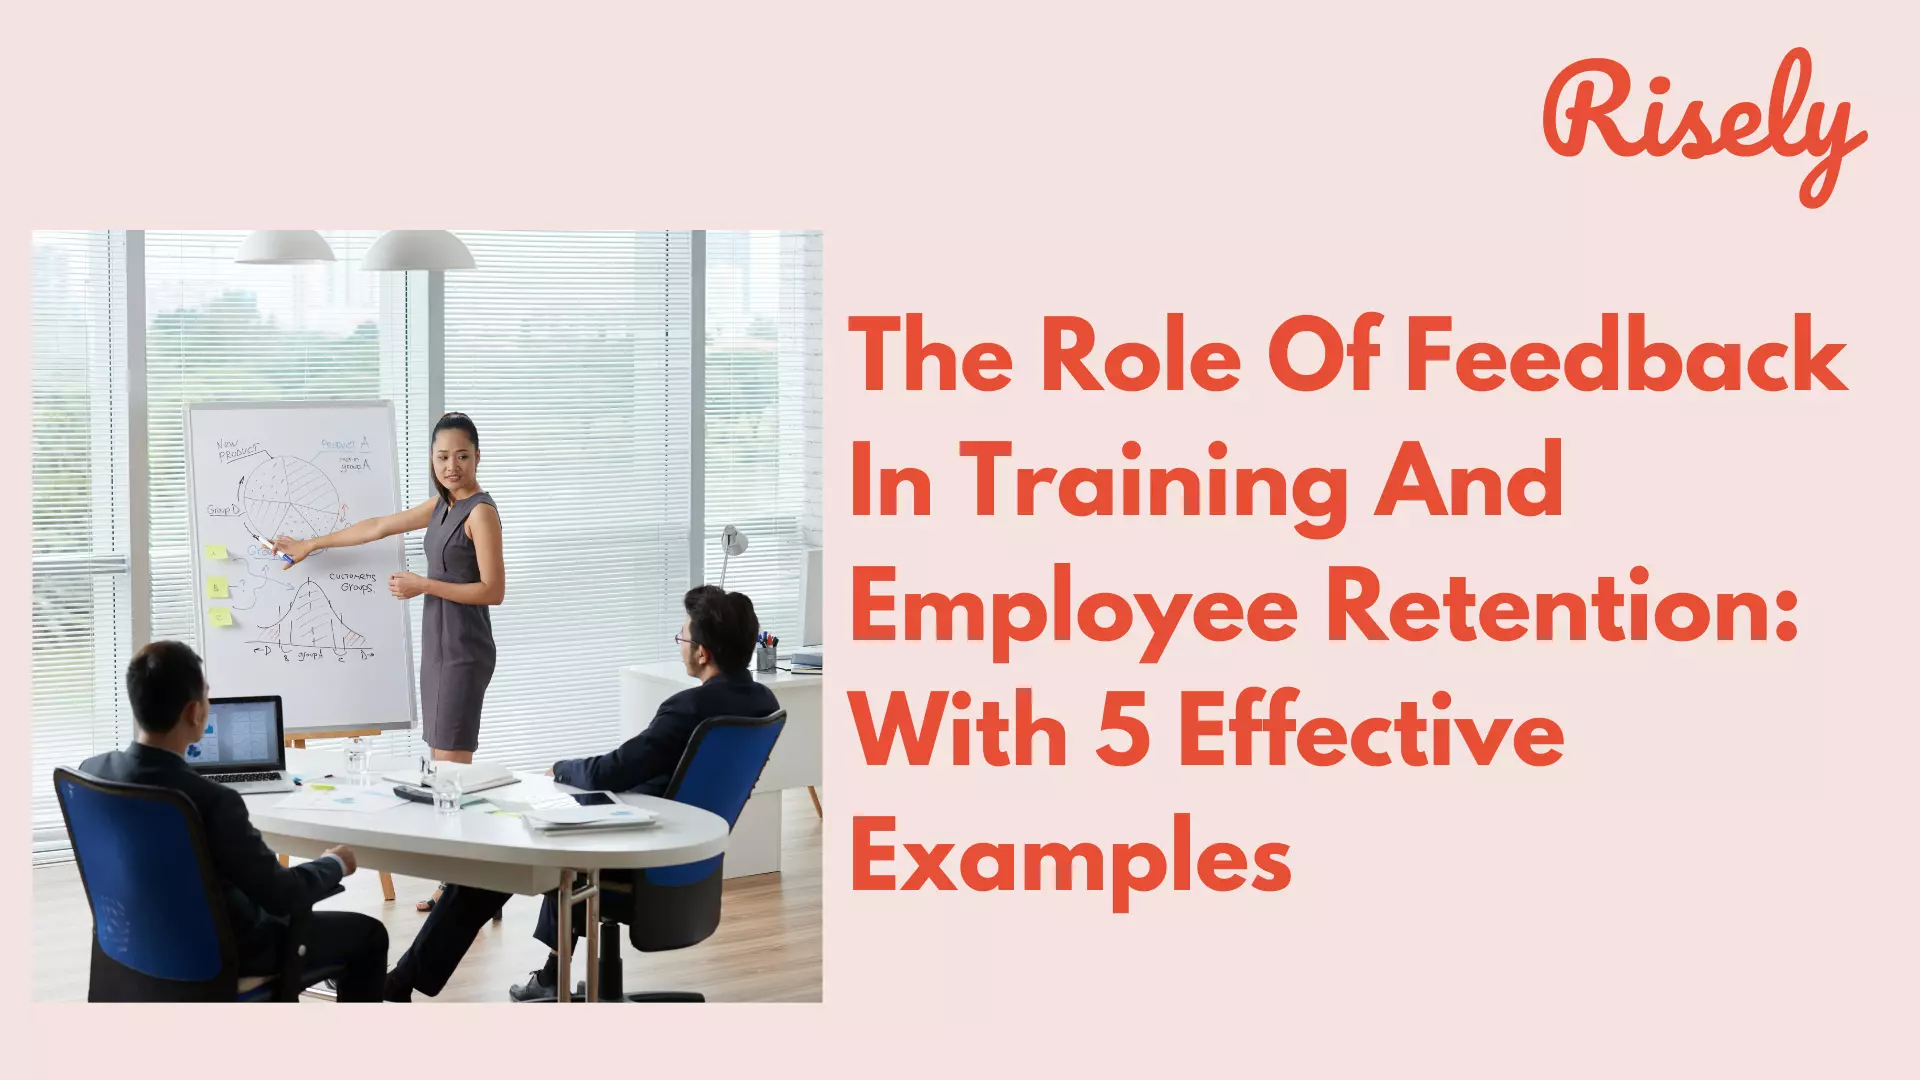 The Role Of Feedback In Training And Employee Retention: With 5 Effective Examples